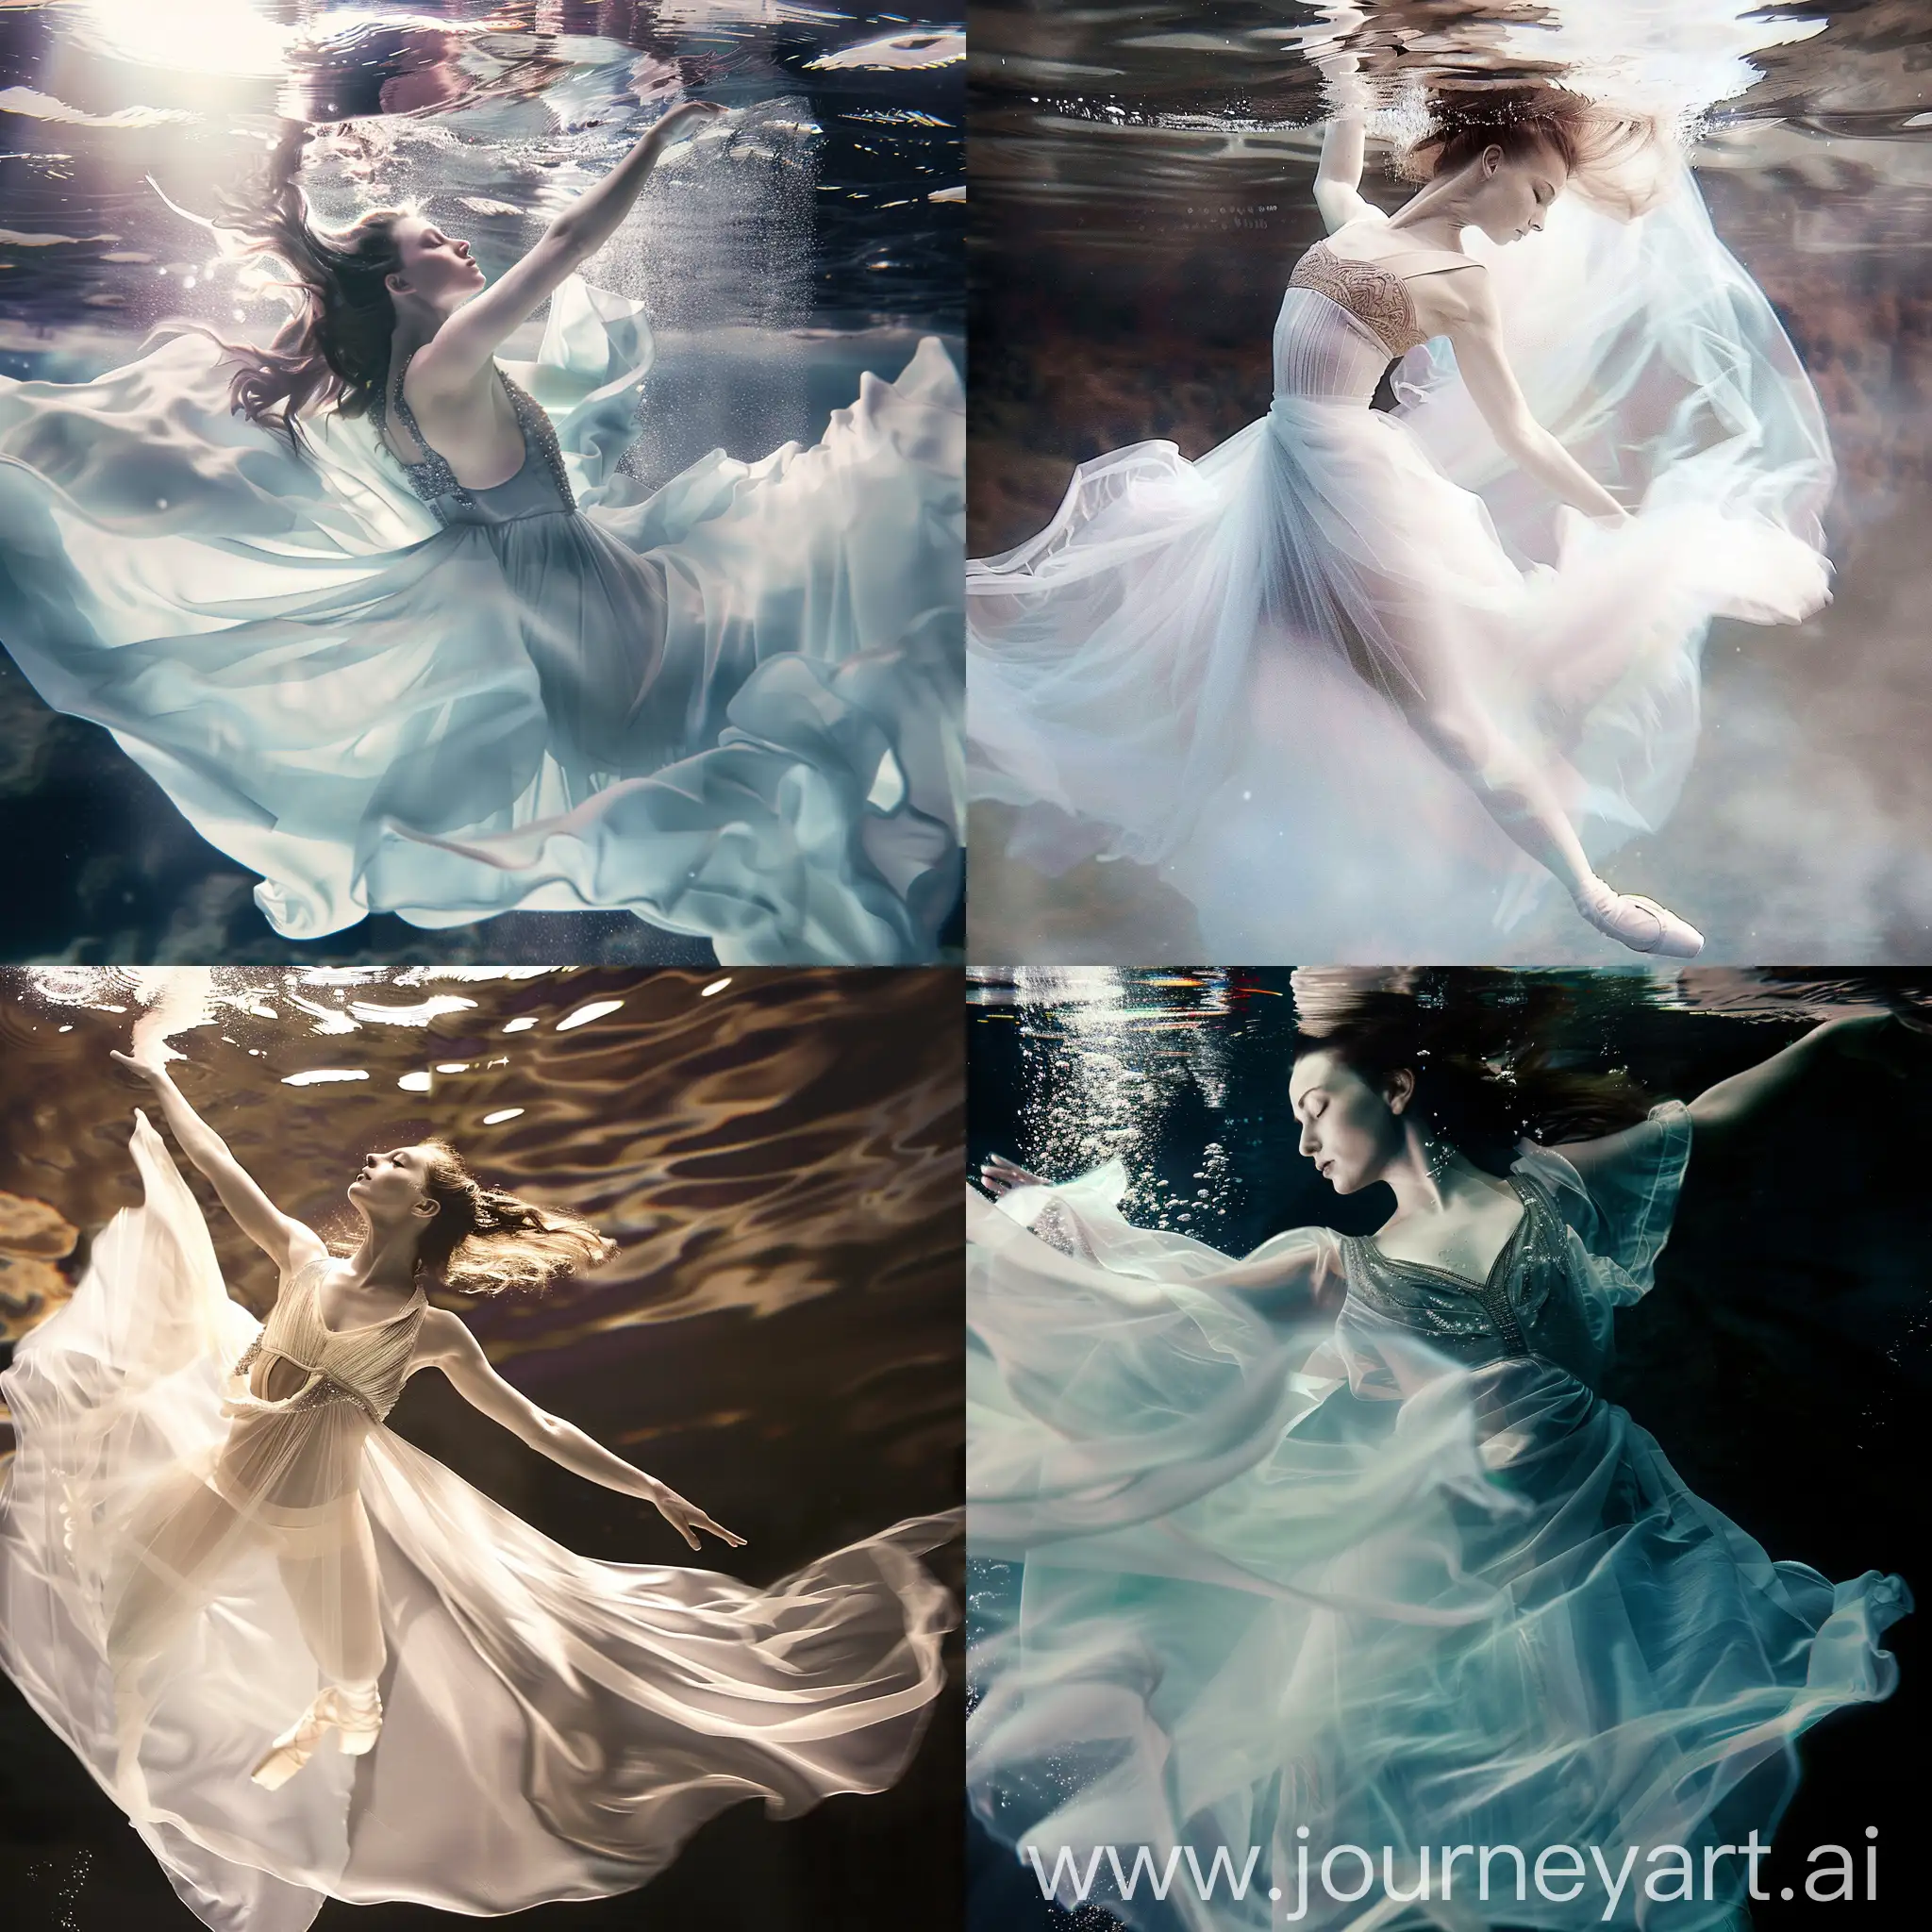 A surreal image of a ballet dancer performing underwater, her gown flowing around her in a weightless dance. The water distorts light and motion, creating a dreamlike atmosphere that accentuates the elegance and fluidity of her movements. --ar 1:1 --s 0 --v 6.0 --style raw